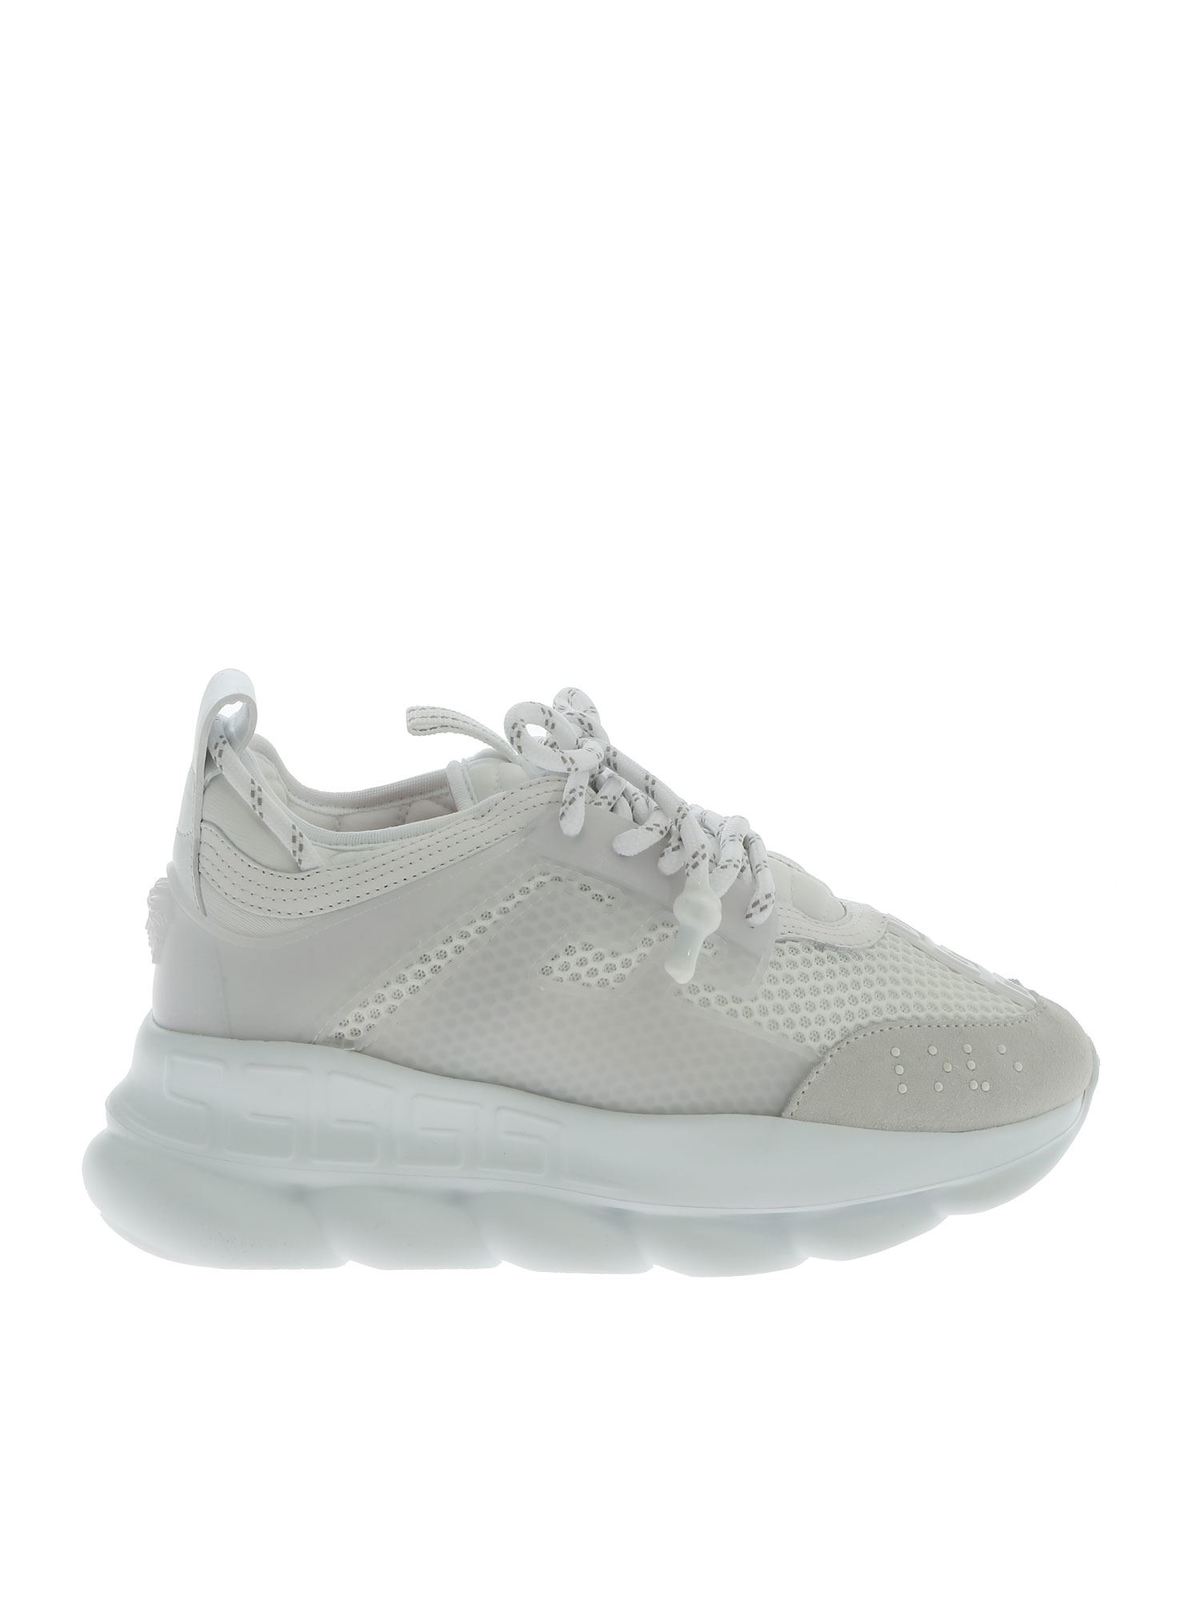 Versace Chain Reaction Sneakers In White | ModeSens